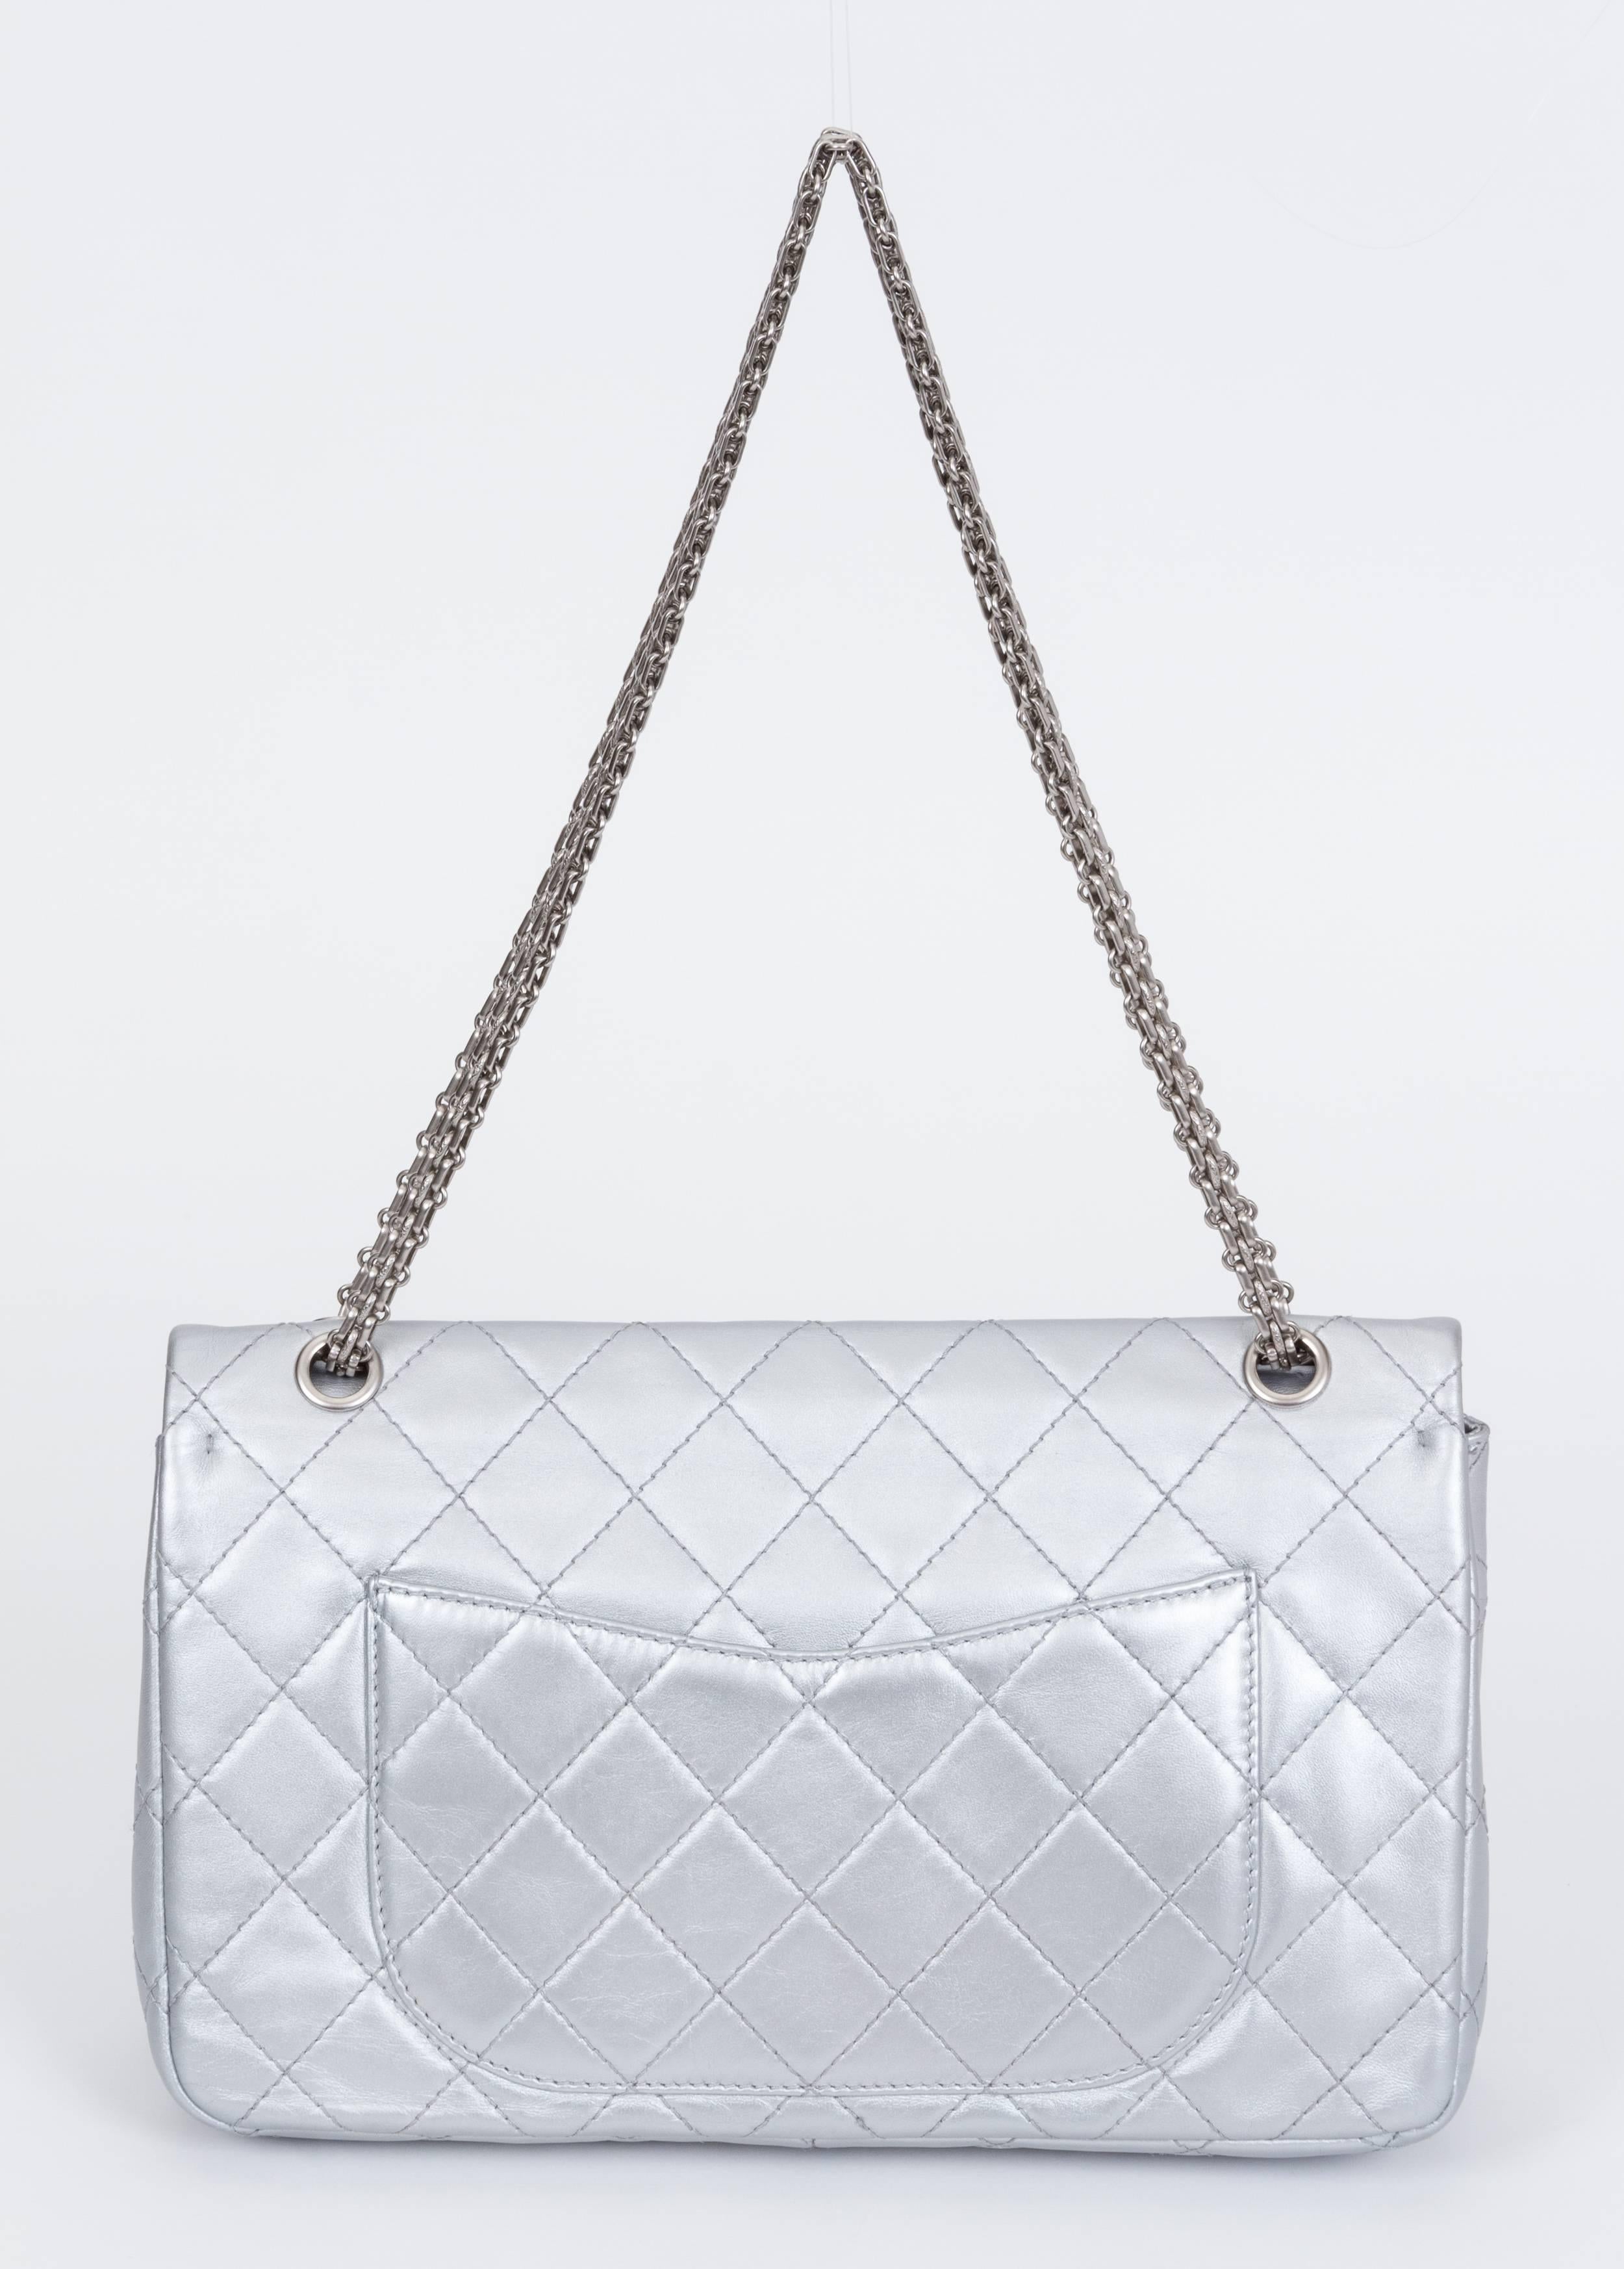 Chanel Silver Jumbo Reissue Double Flap In Excellent Condition For Sale In West Hollywood, CA